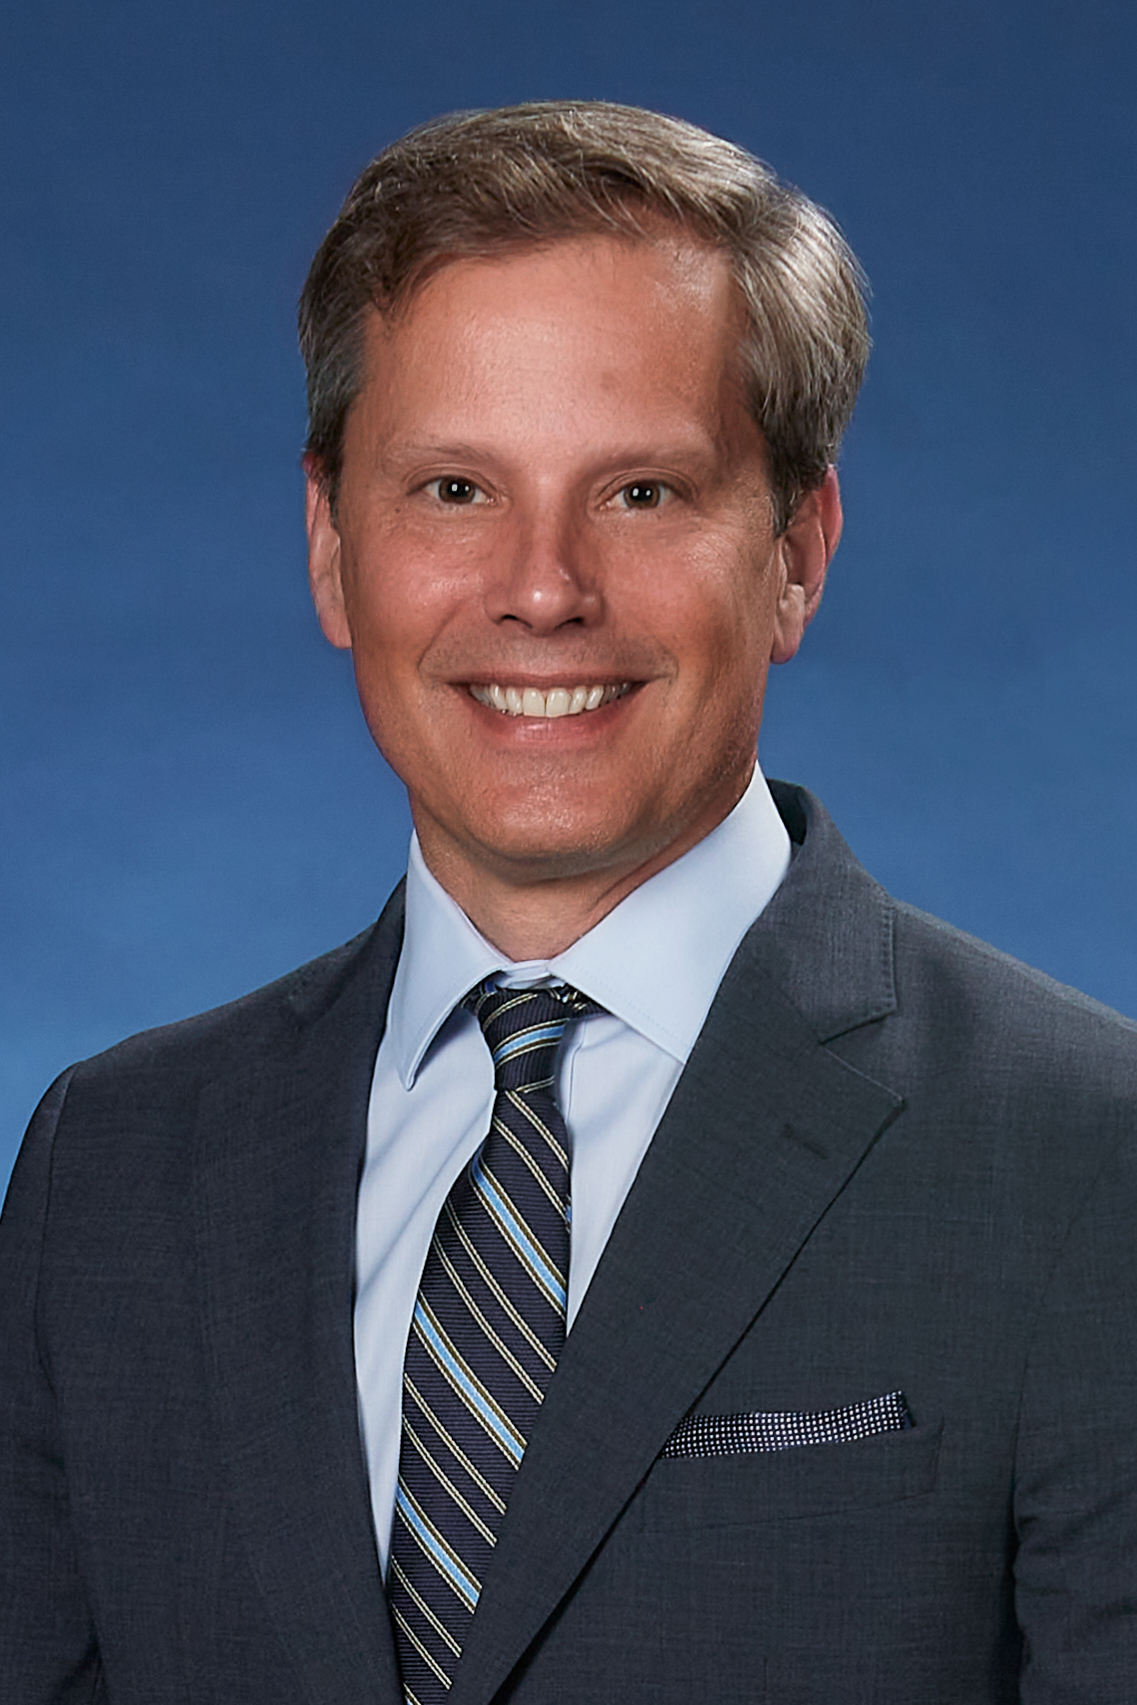 Lincoln Electric names Steven B. Hedlund as incoming CEO